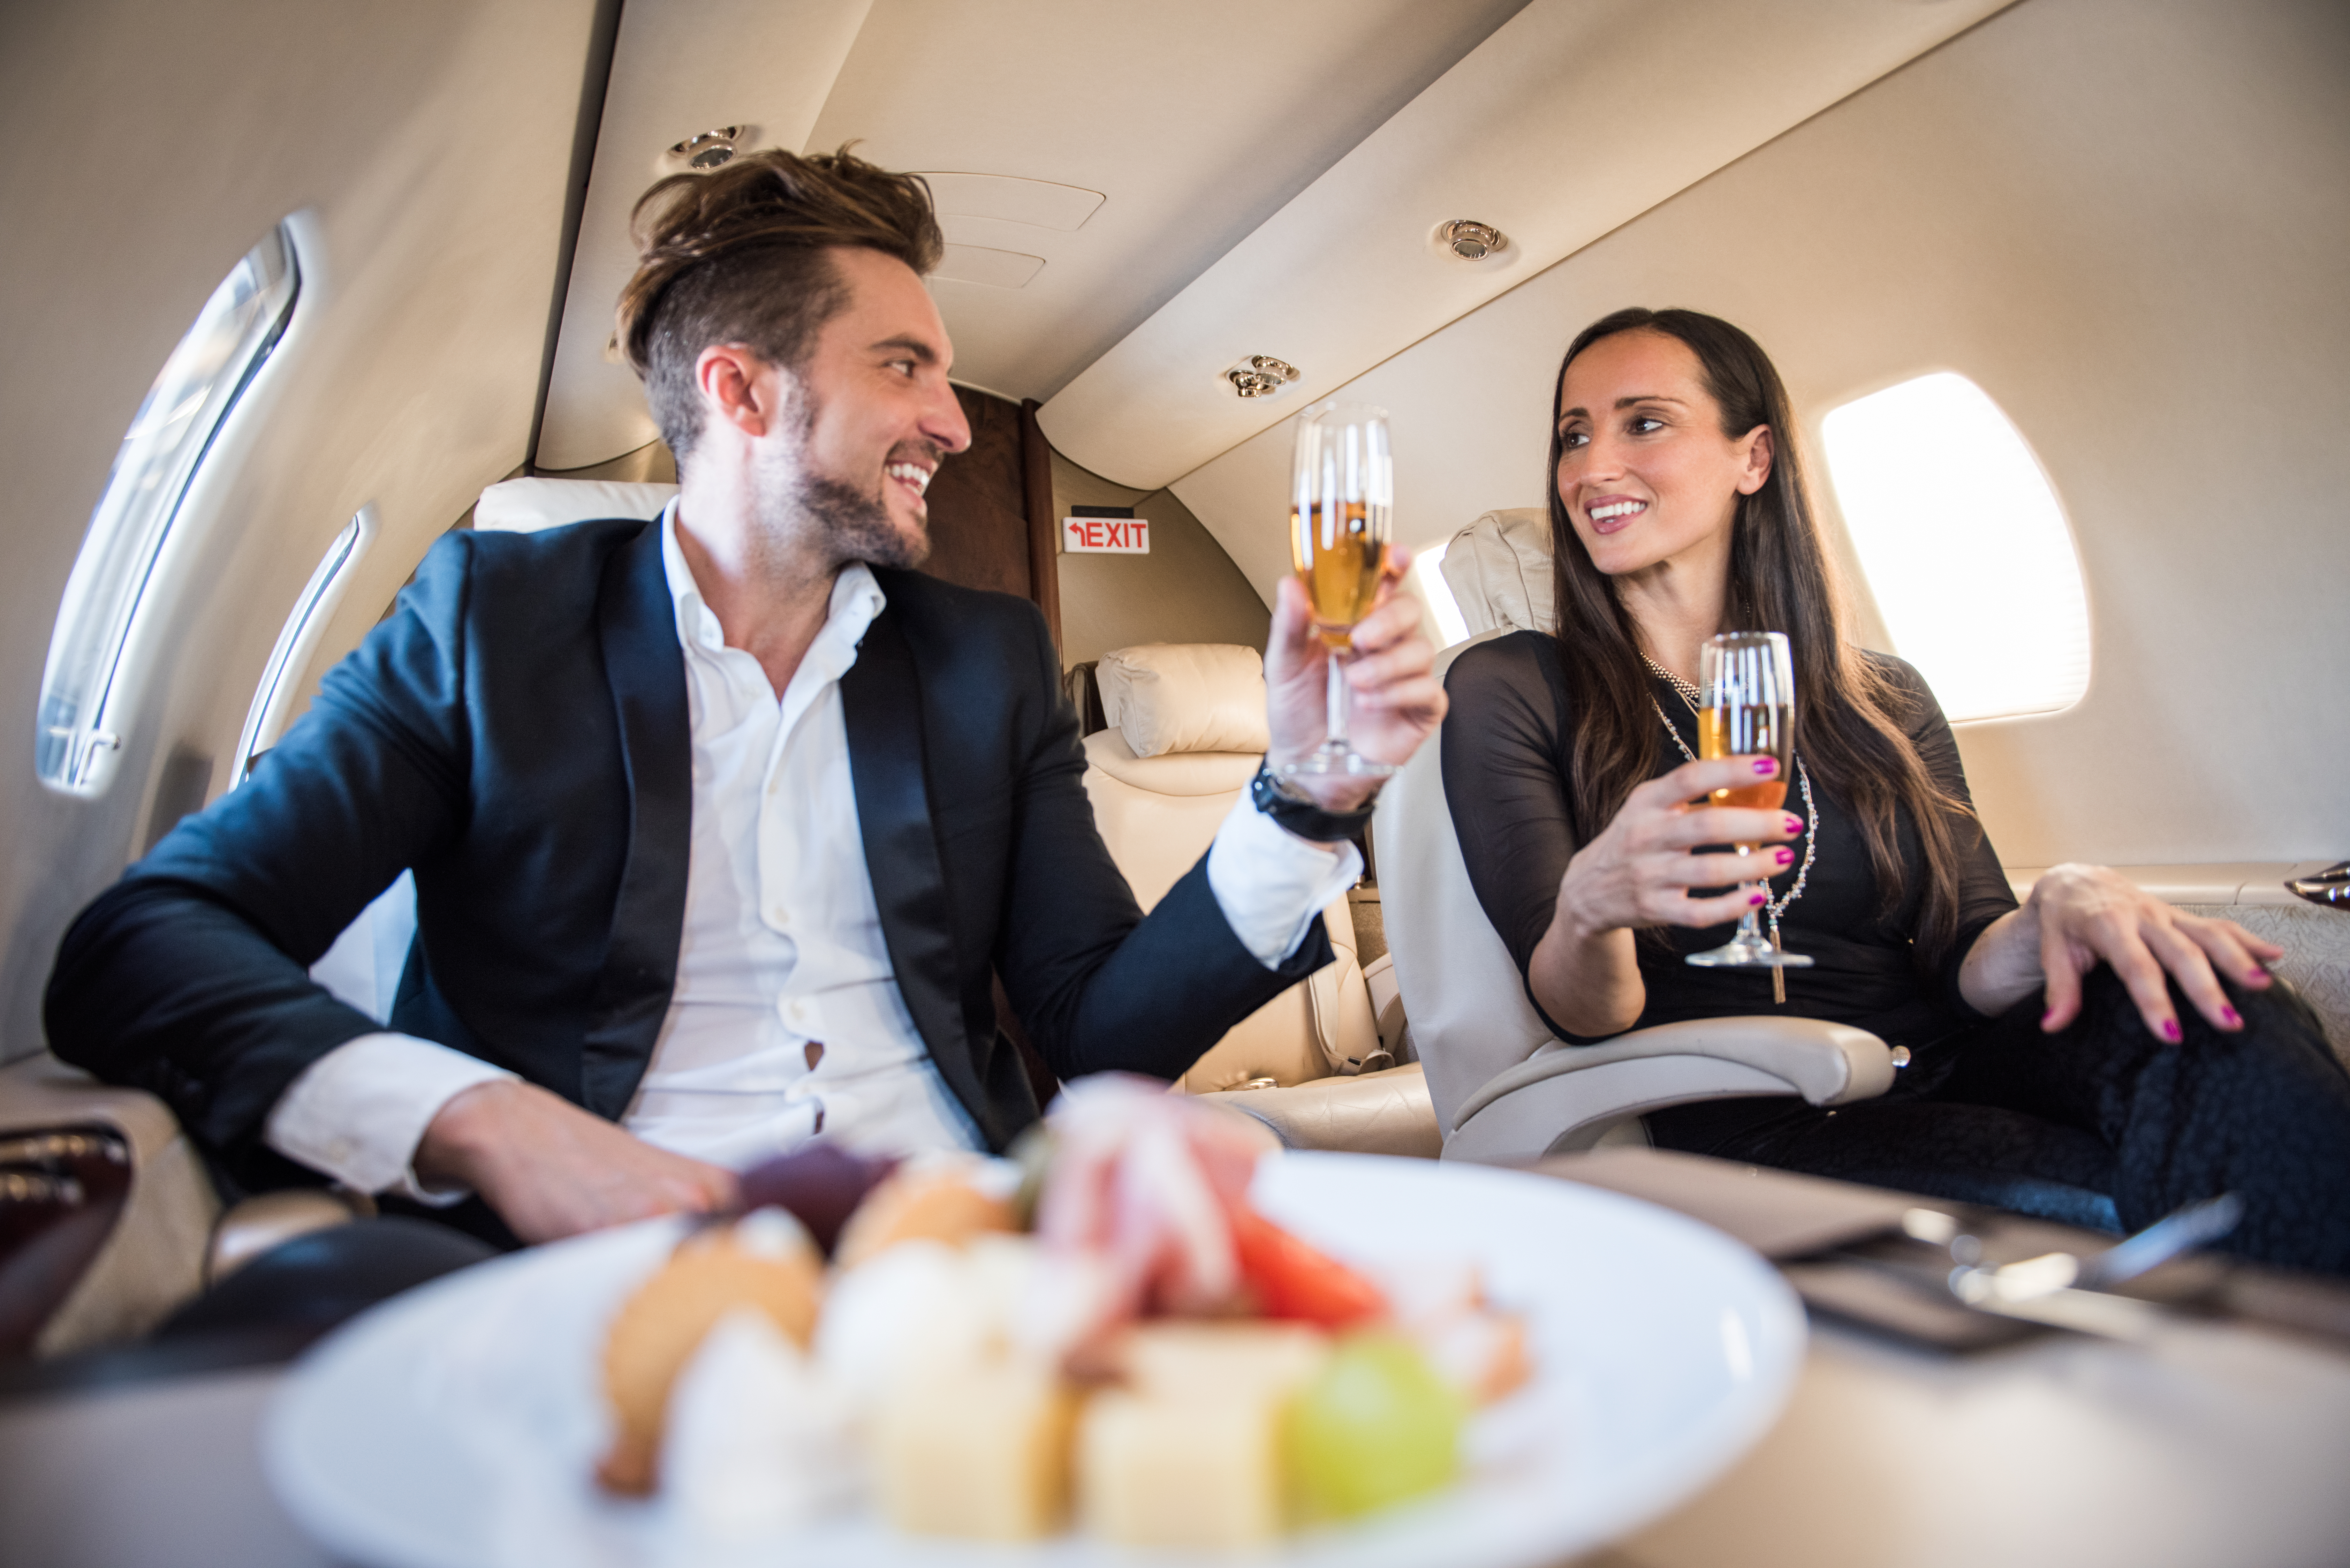 Business class customers pay a premium and expect fine dining